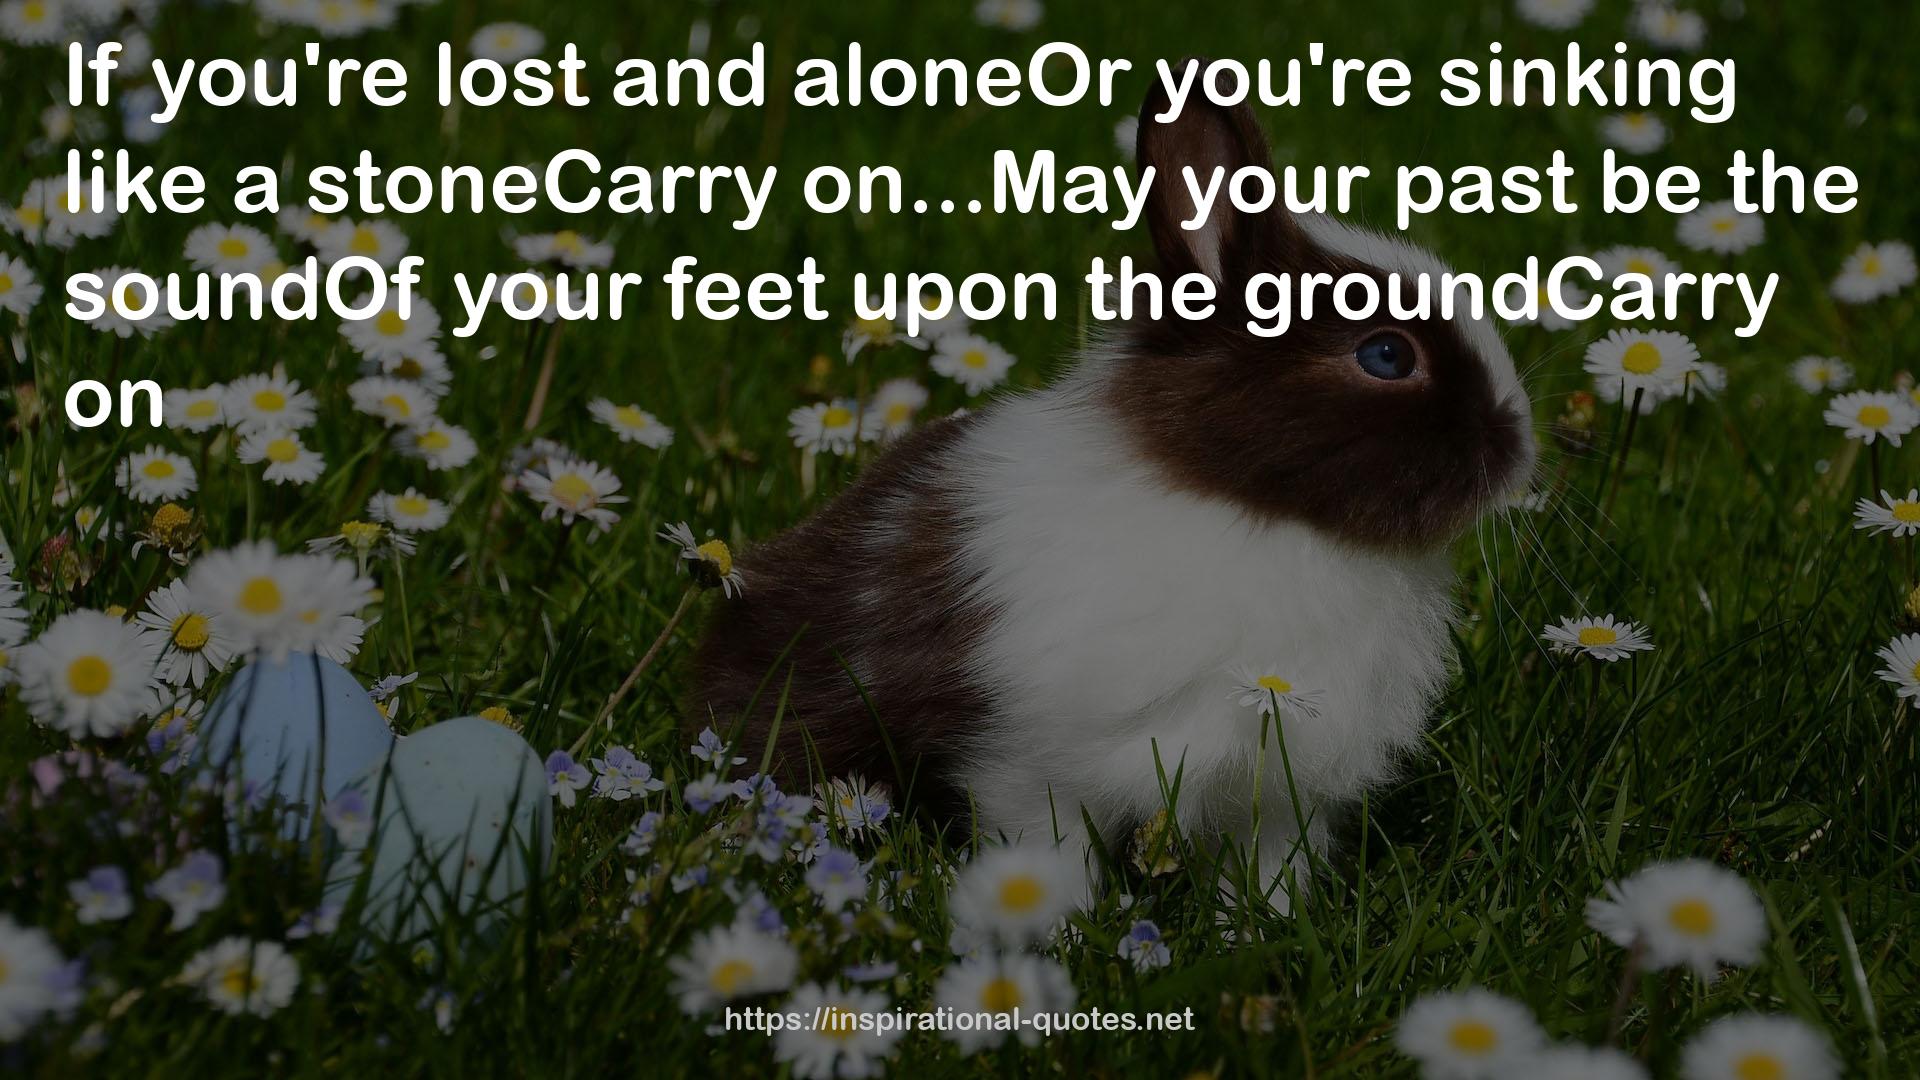 soundOf your feet  QUOTES